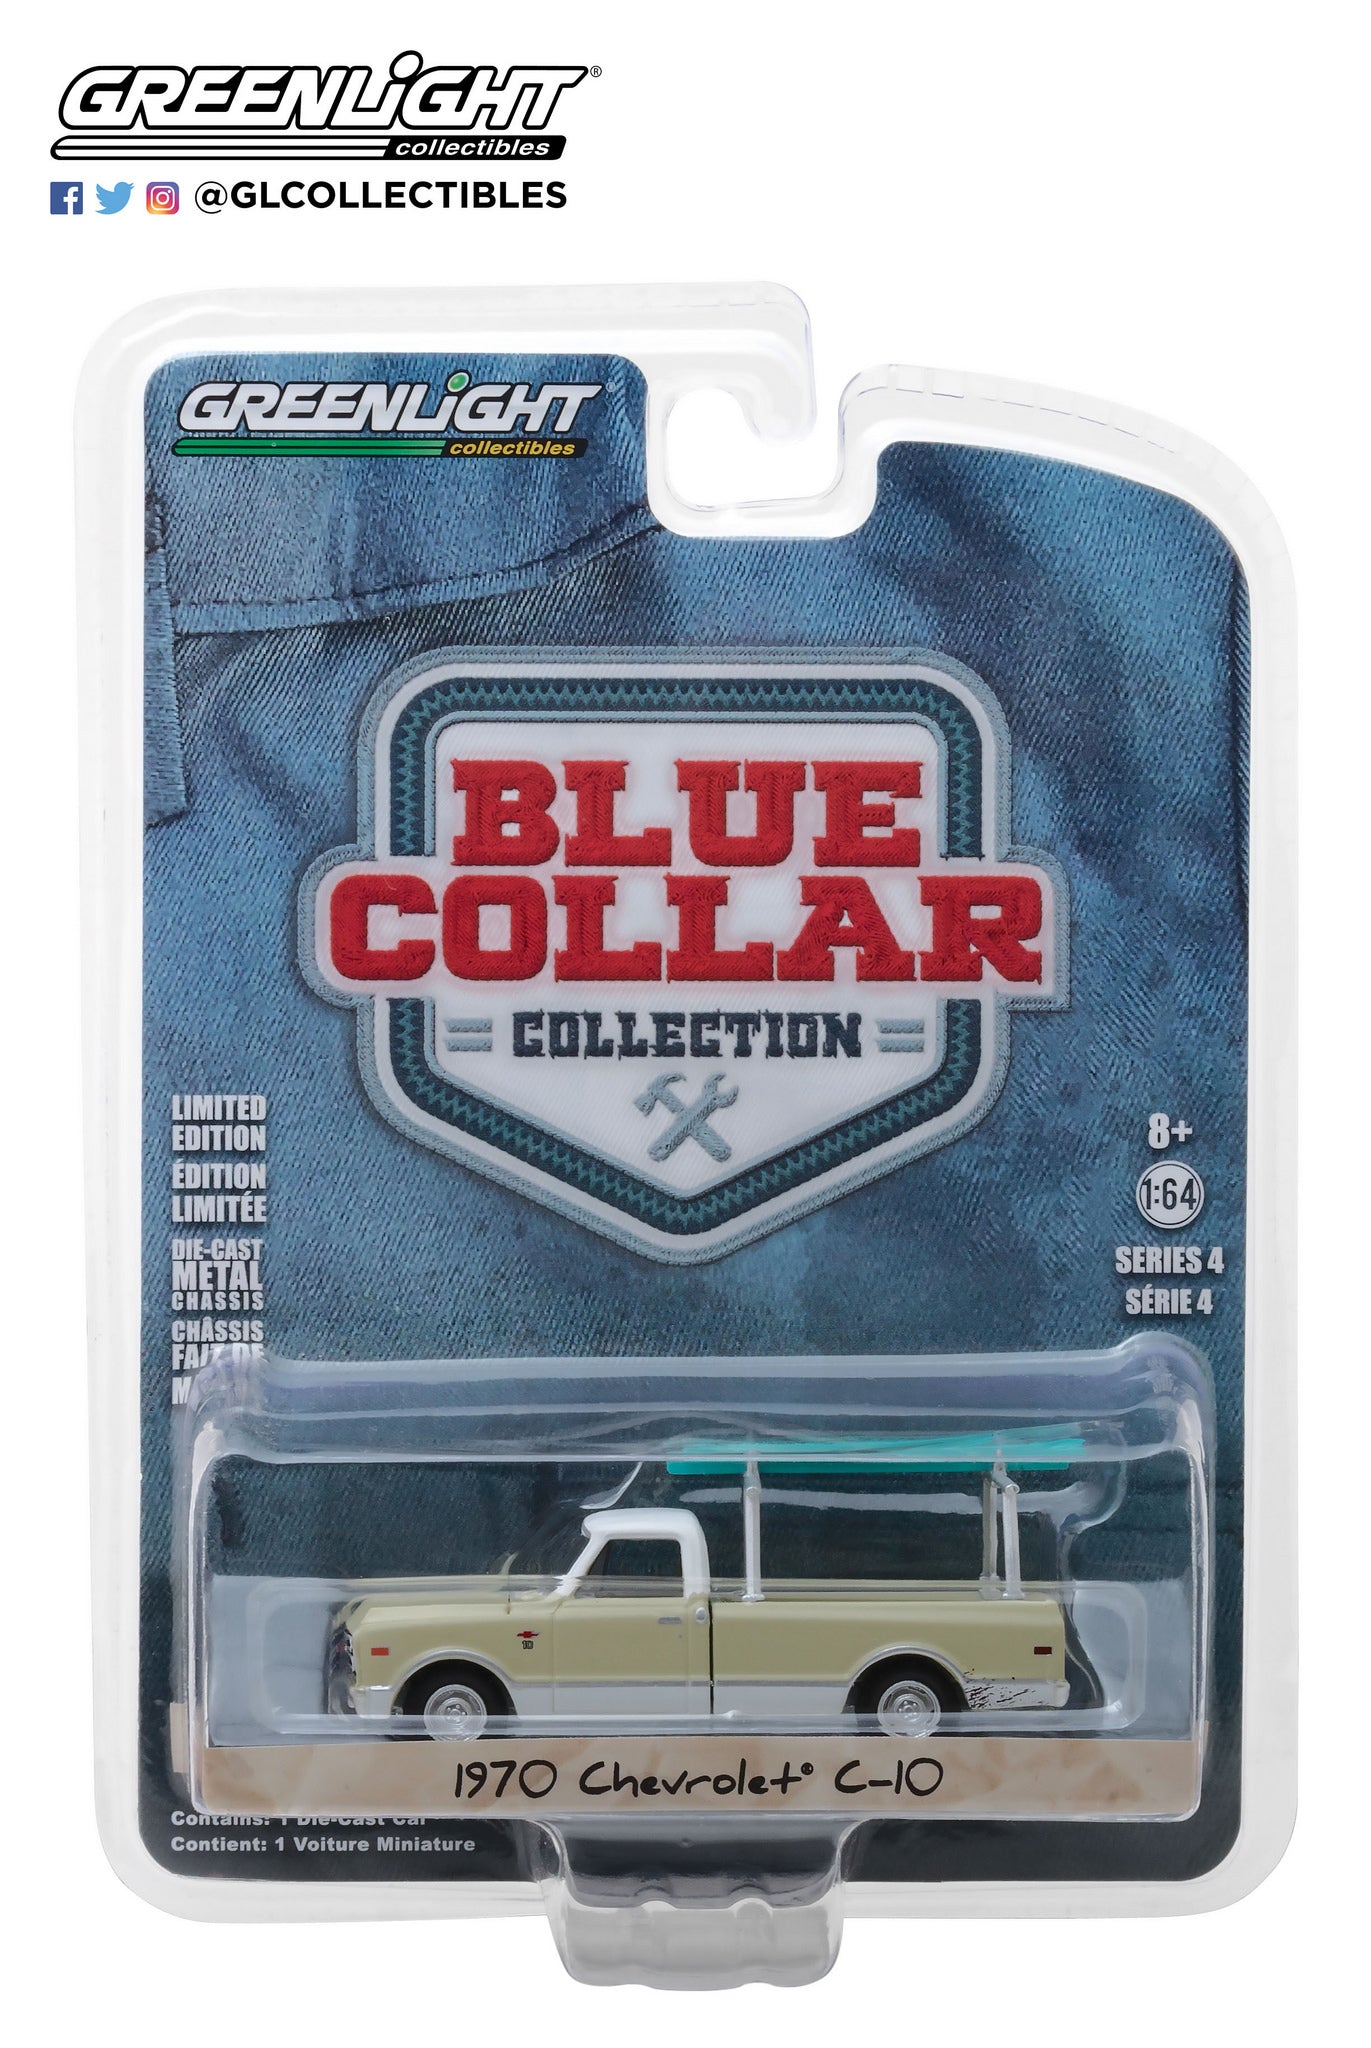 GreenLight 1:64 Blue Collar Collection Series 4 - 1970 Chevrolet C-10 with Ladder Rack 35100-B